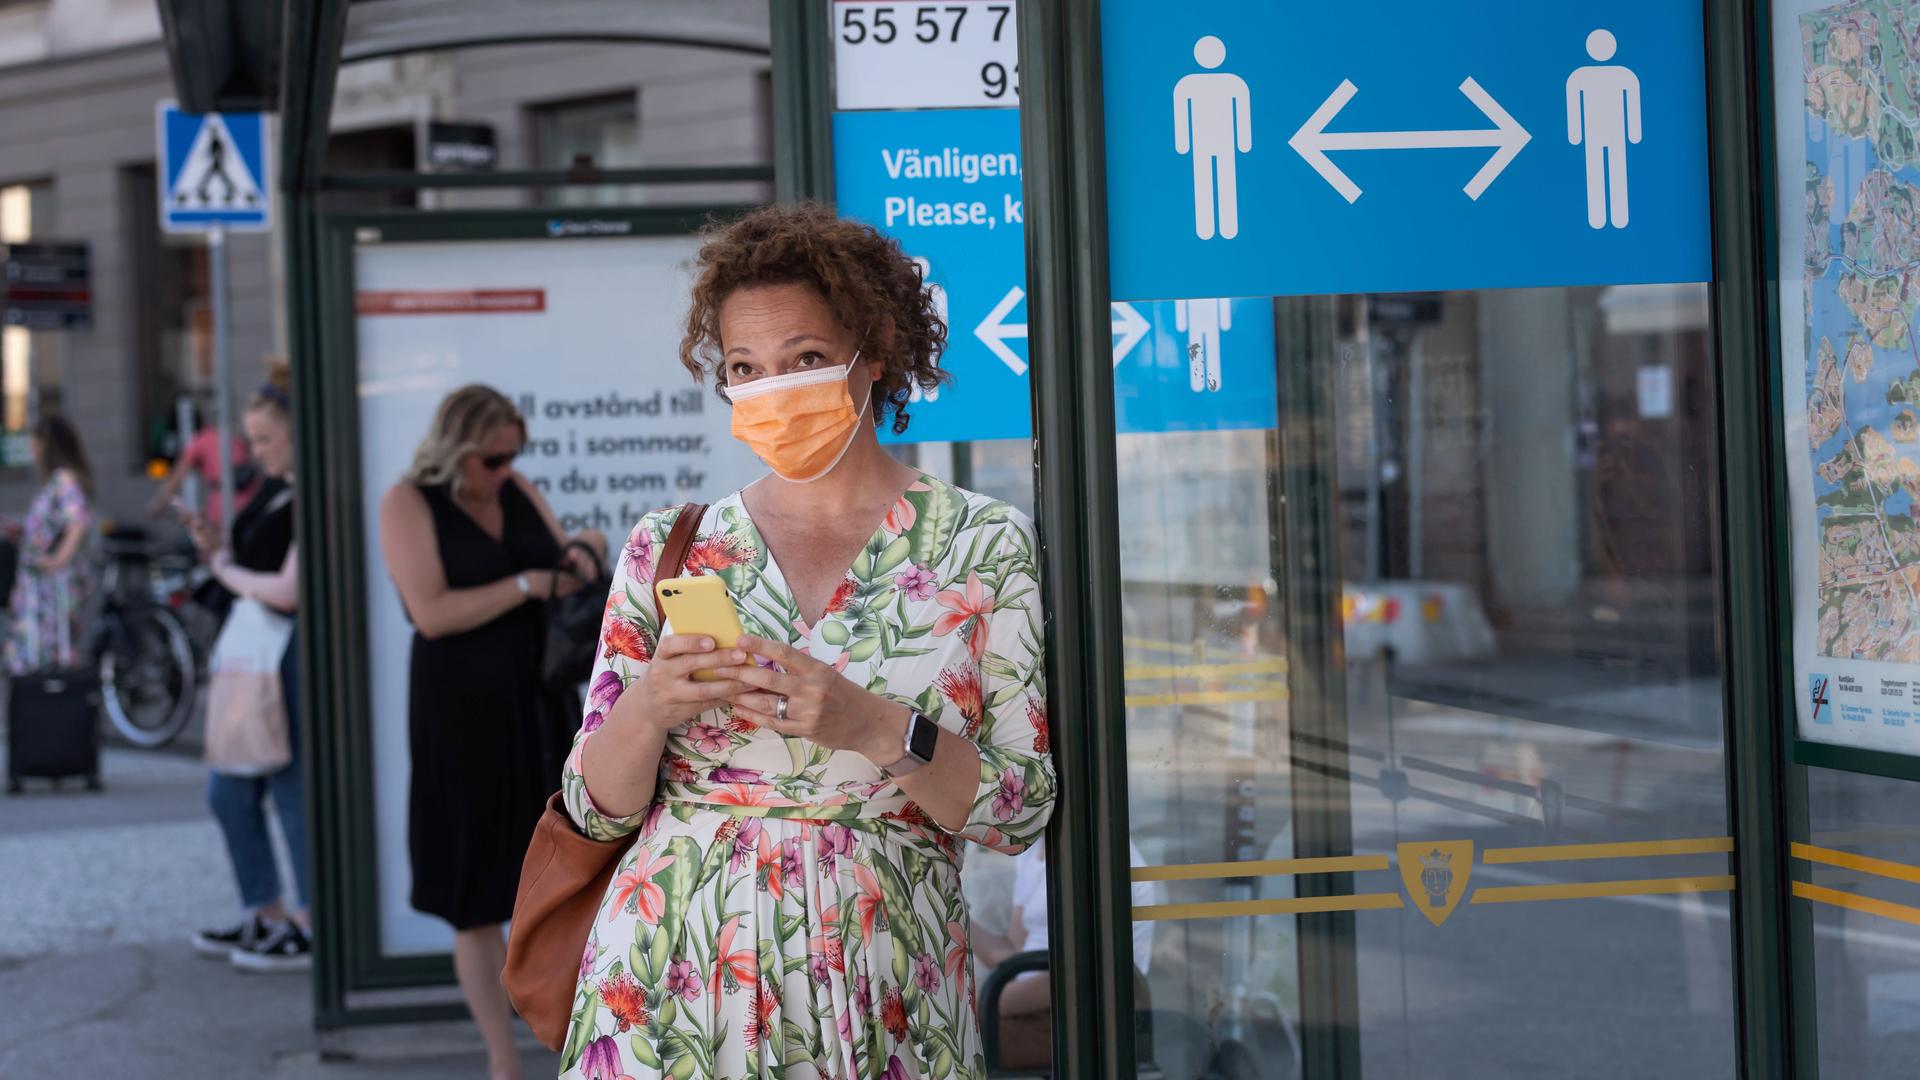 A woman wearing a face mask is seen in a bus stop next to an information sign asking people to keep social distance due to the outbreak of the coronavirus disease (COVID-19), in Stockholm, Sweden, June 26, 2020. 